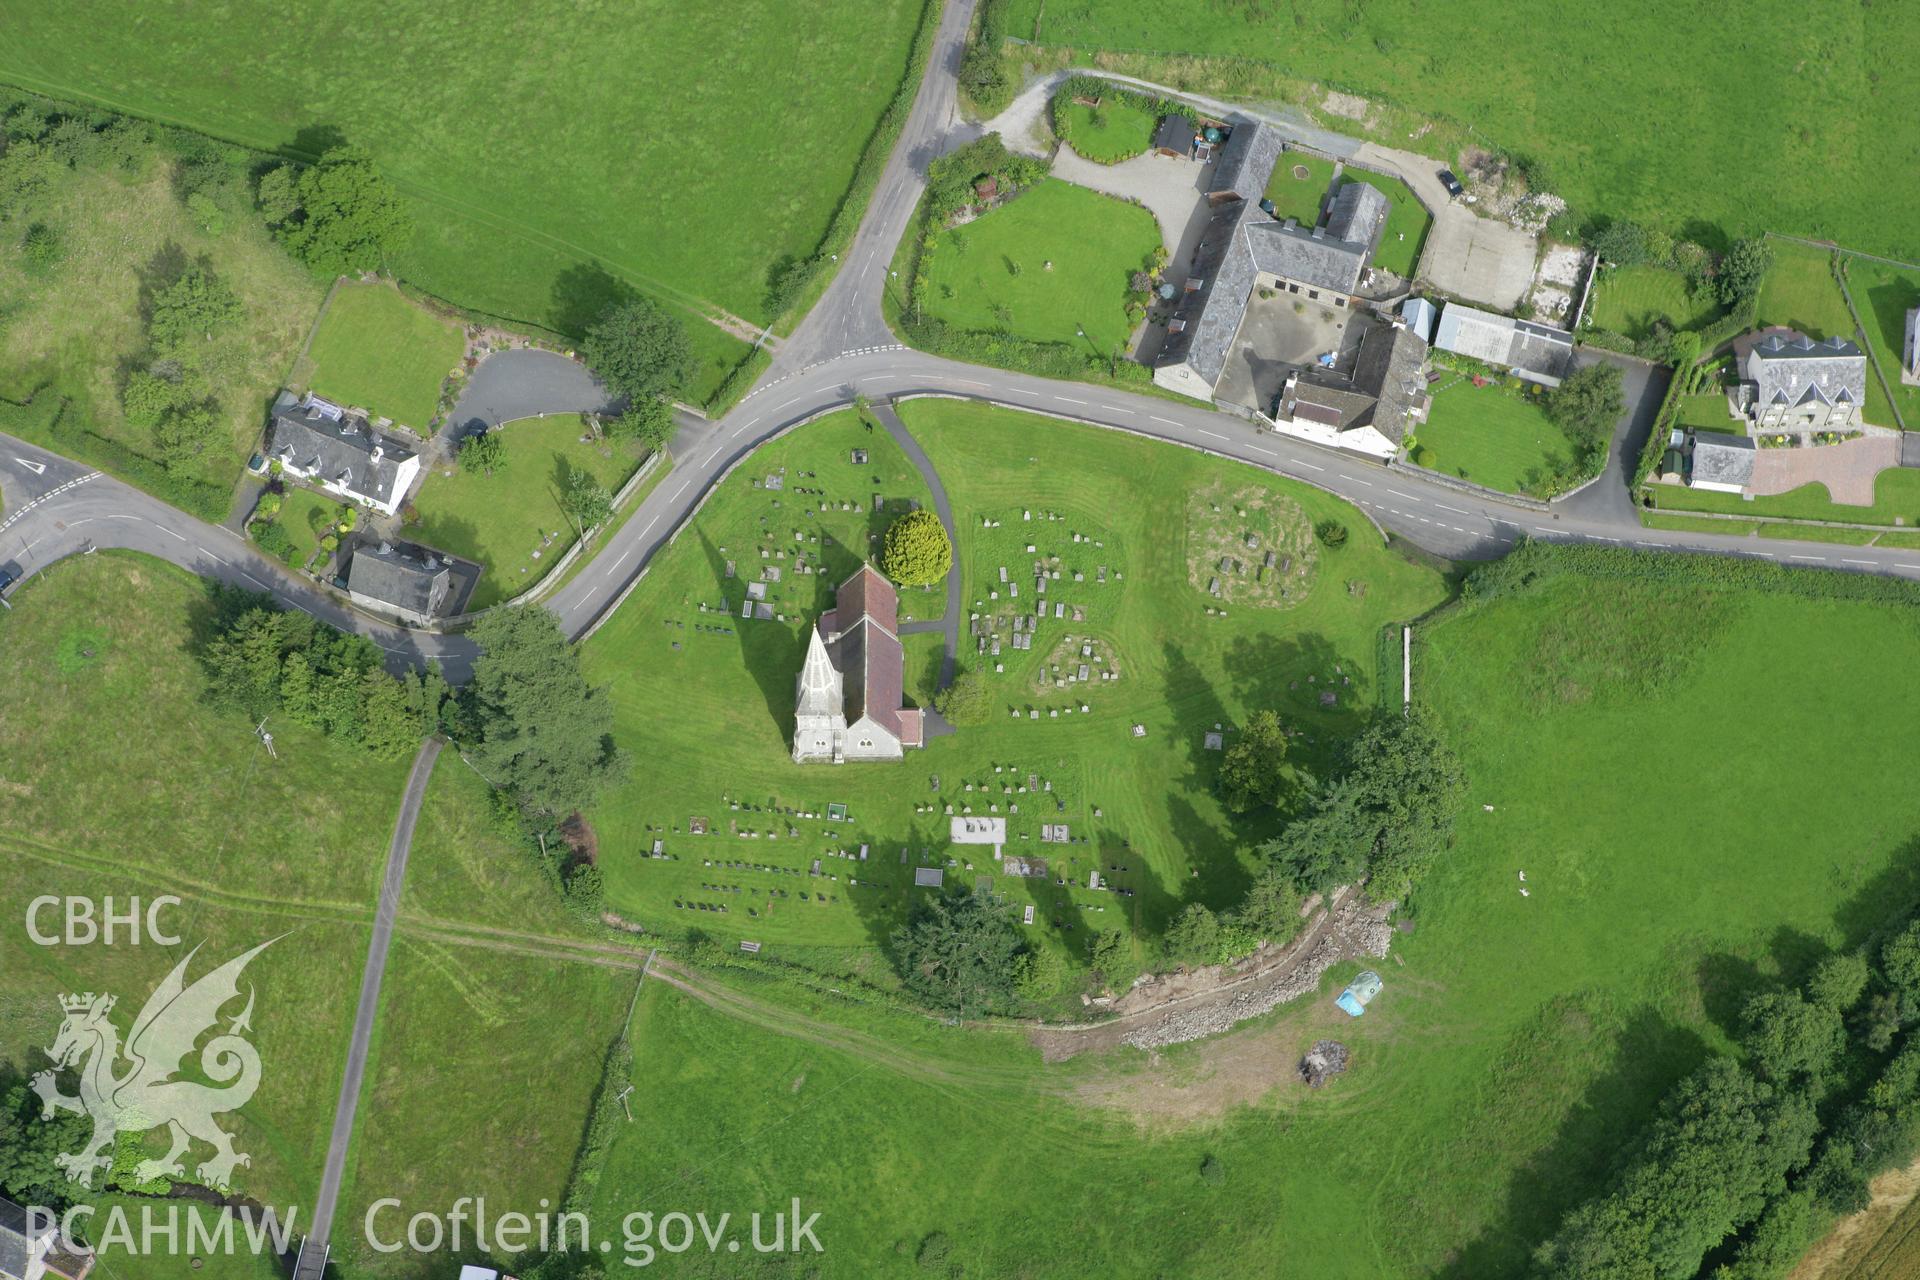 RCAHMW colour oblique aerial photograph of St. Cynog's Church, Boughrood. Taken on 09 July 2007 by Toby Driver